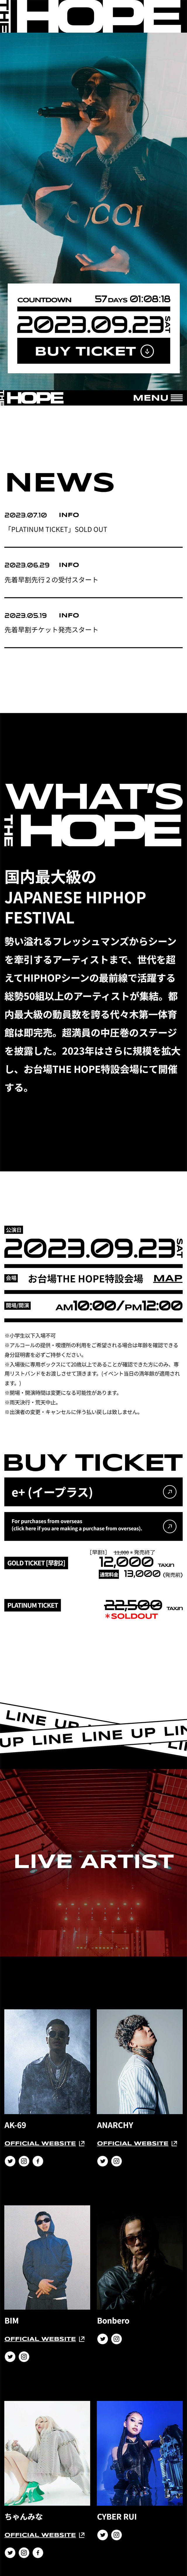 THE HOPE_sp_1